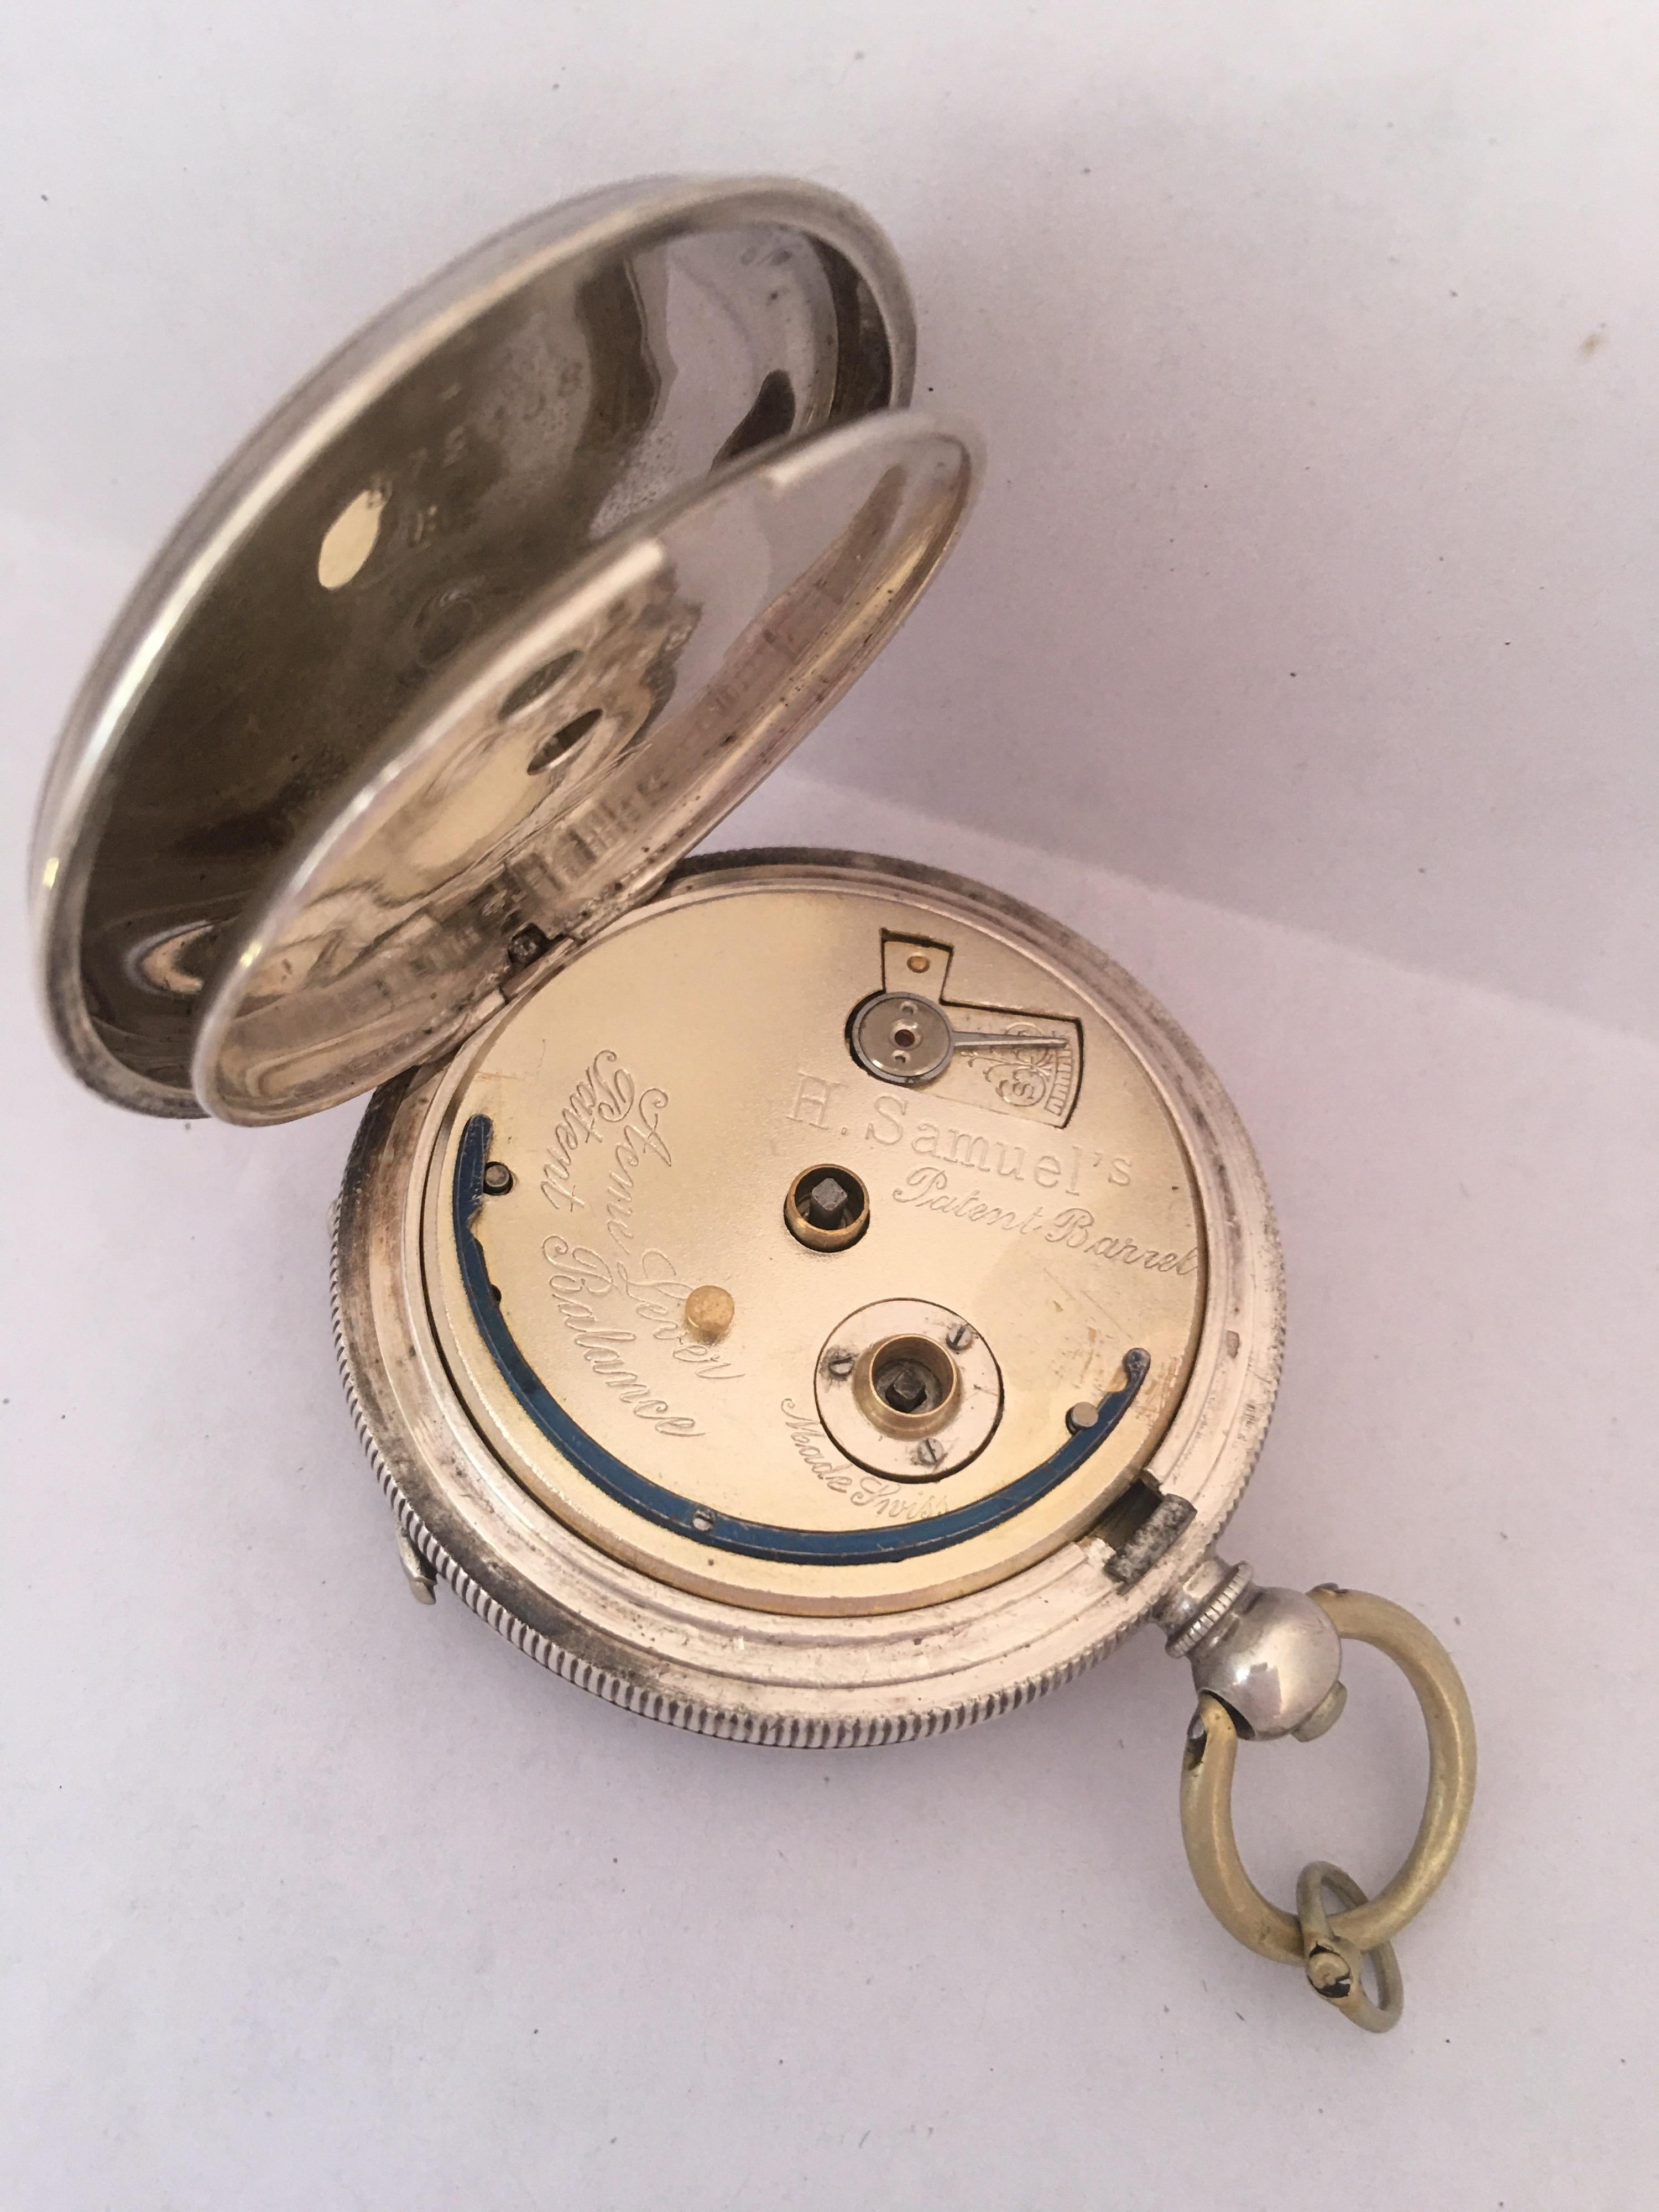 Women's or Men's Antique Silver Key-Winding Pocket Watch Signed Acme Lever H. Samuel Manchester